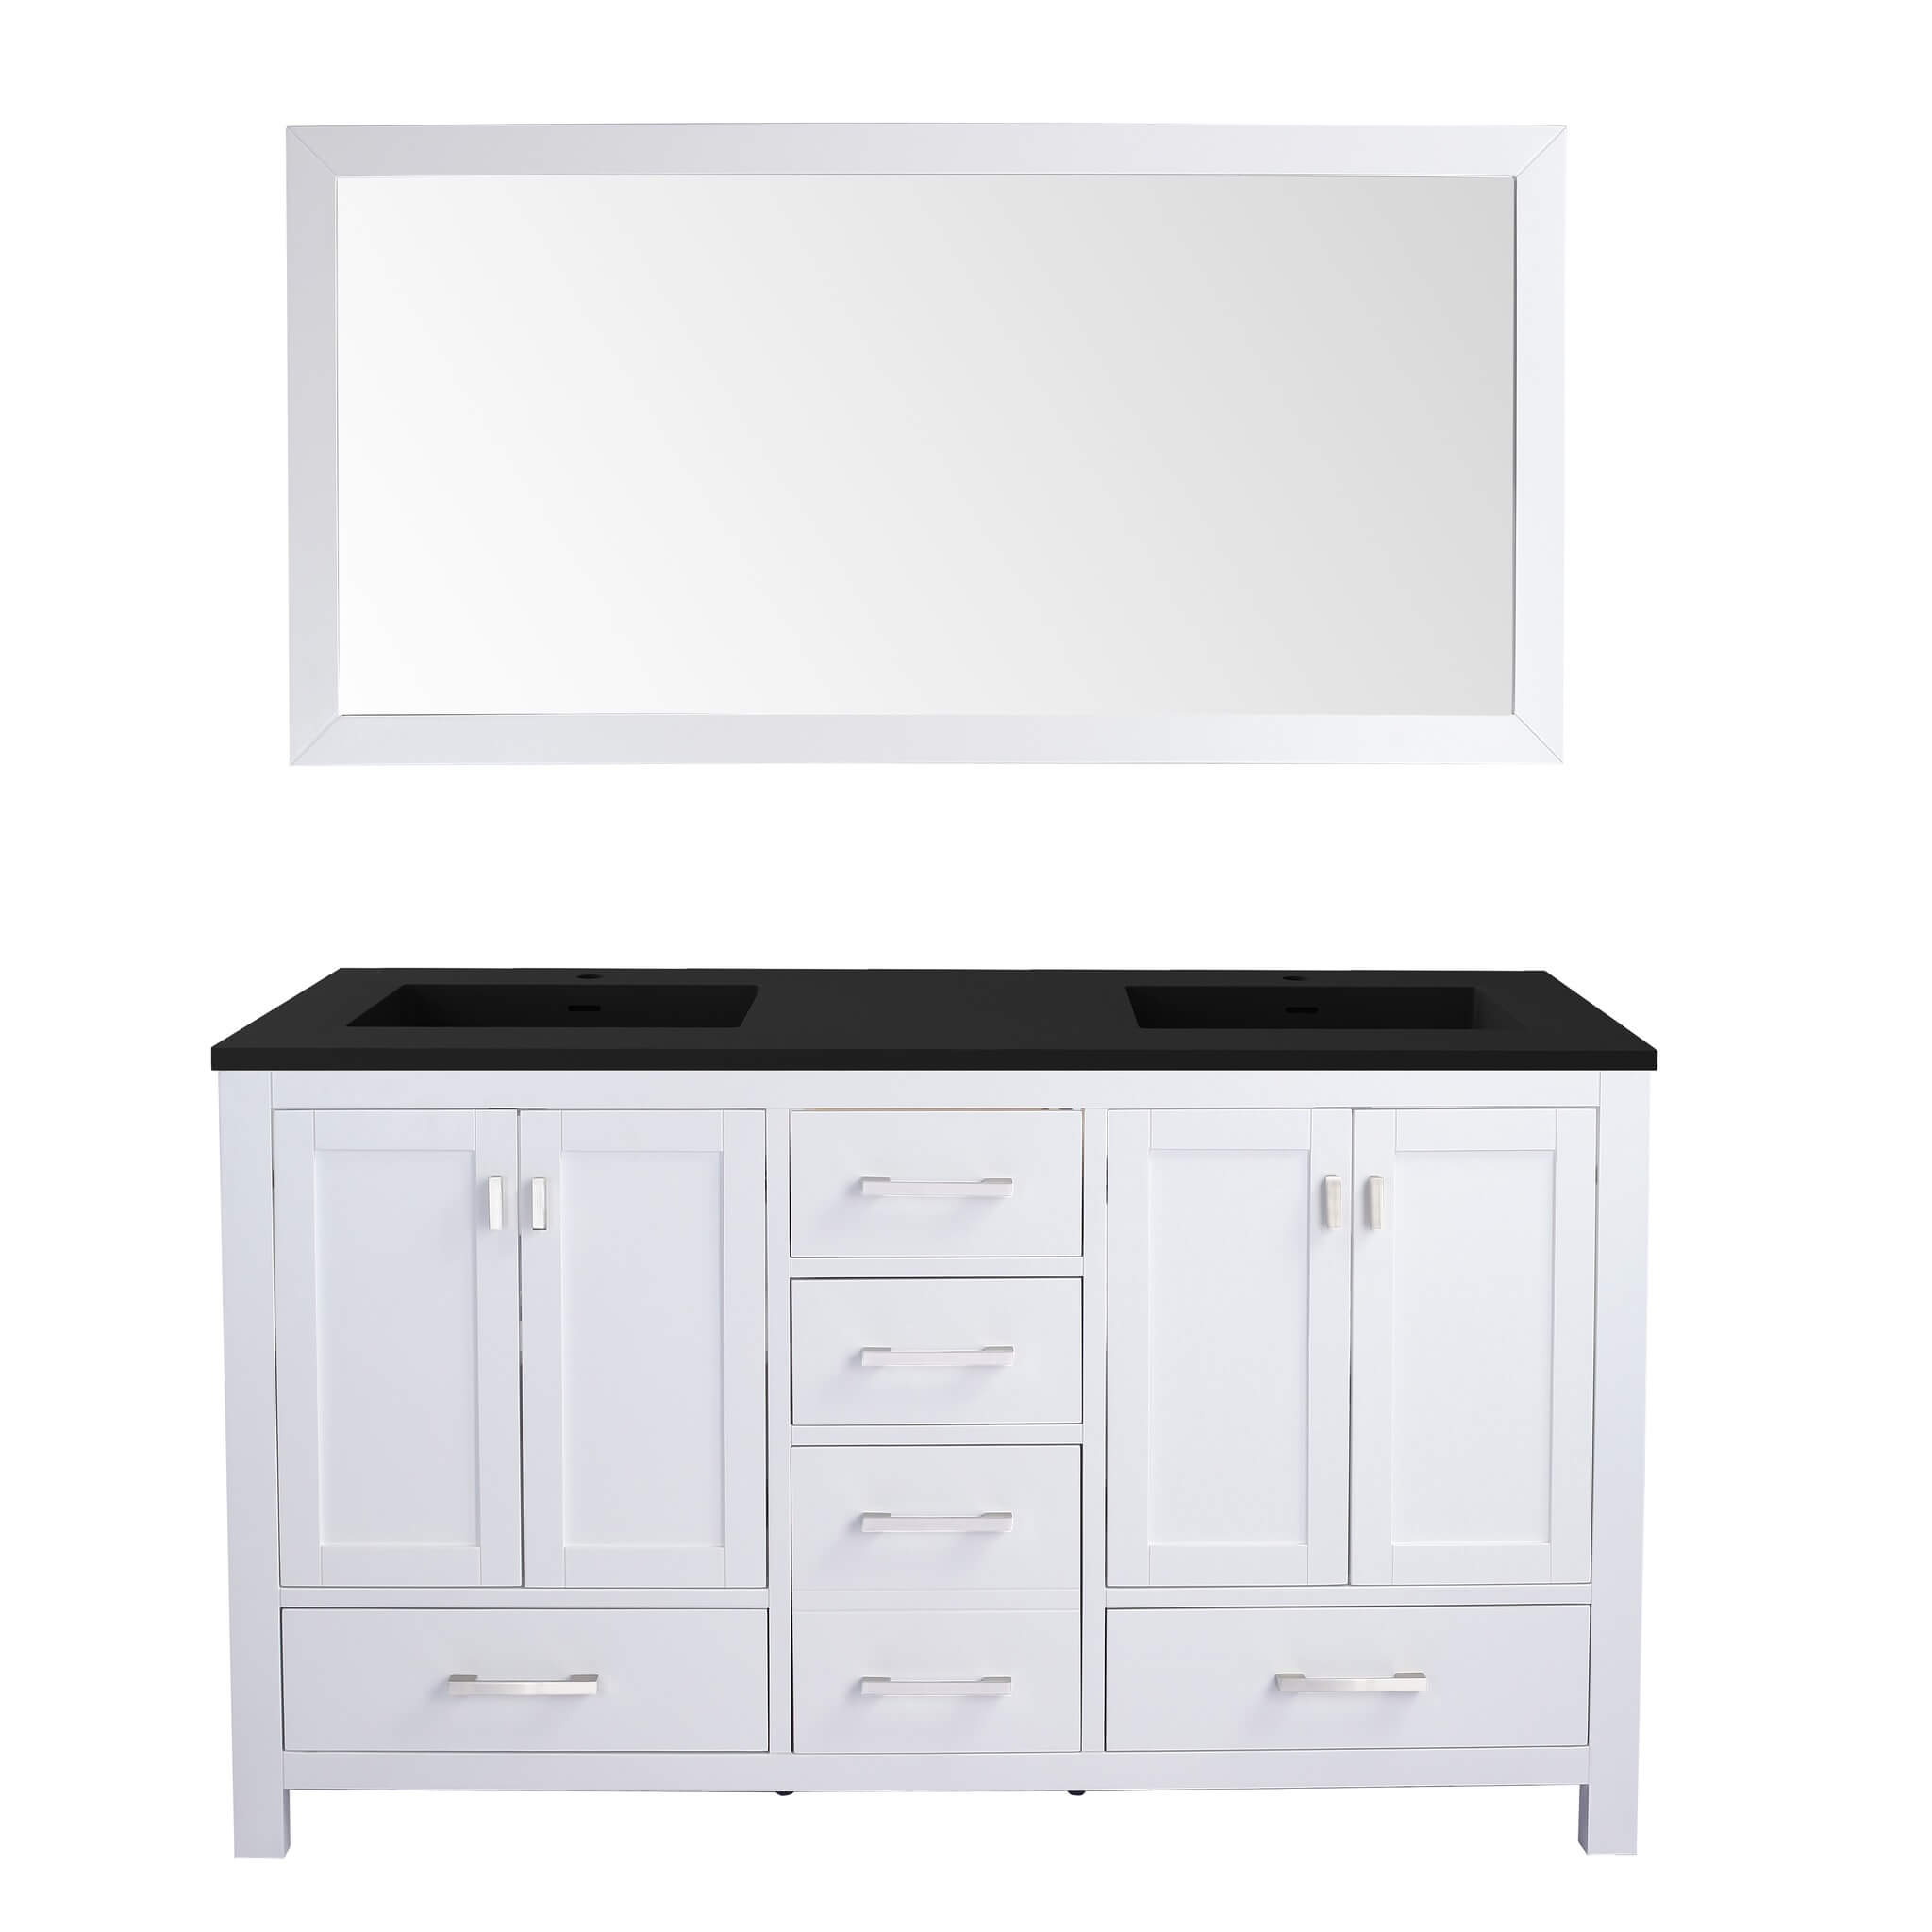 LAVIVA Wilson 313ANG-60W-MB 60" Double Bathroom Vanity in White with Matte Black VIVA Stone Surface, Integrated Sinks, Front View